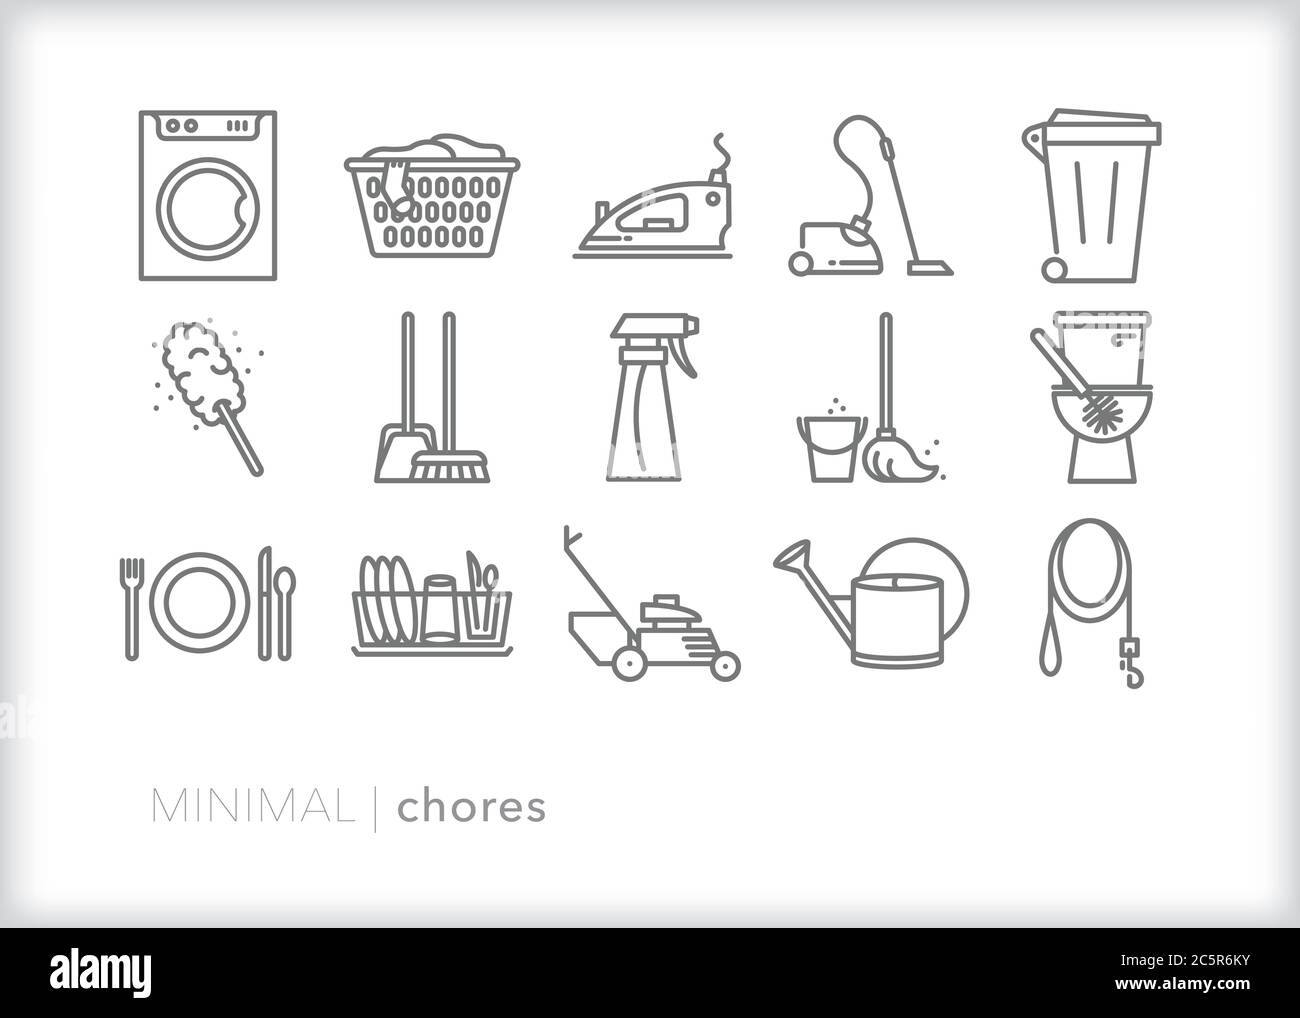 Set of 15 chores line icons for cleaning and doing housework Stock Vector